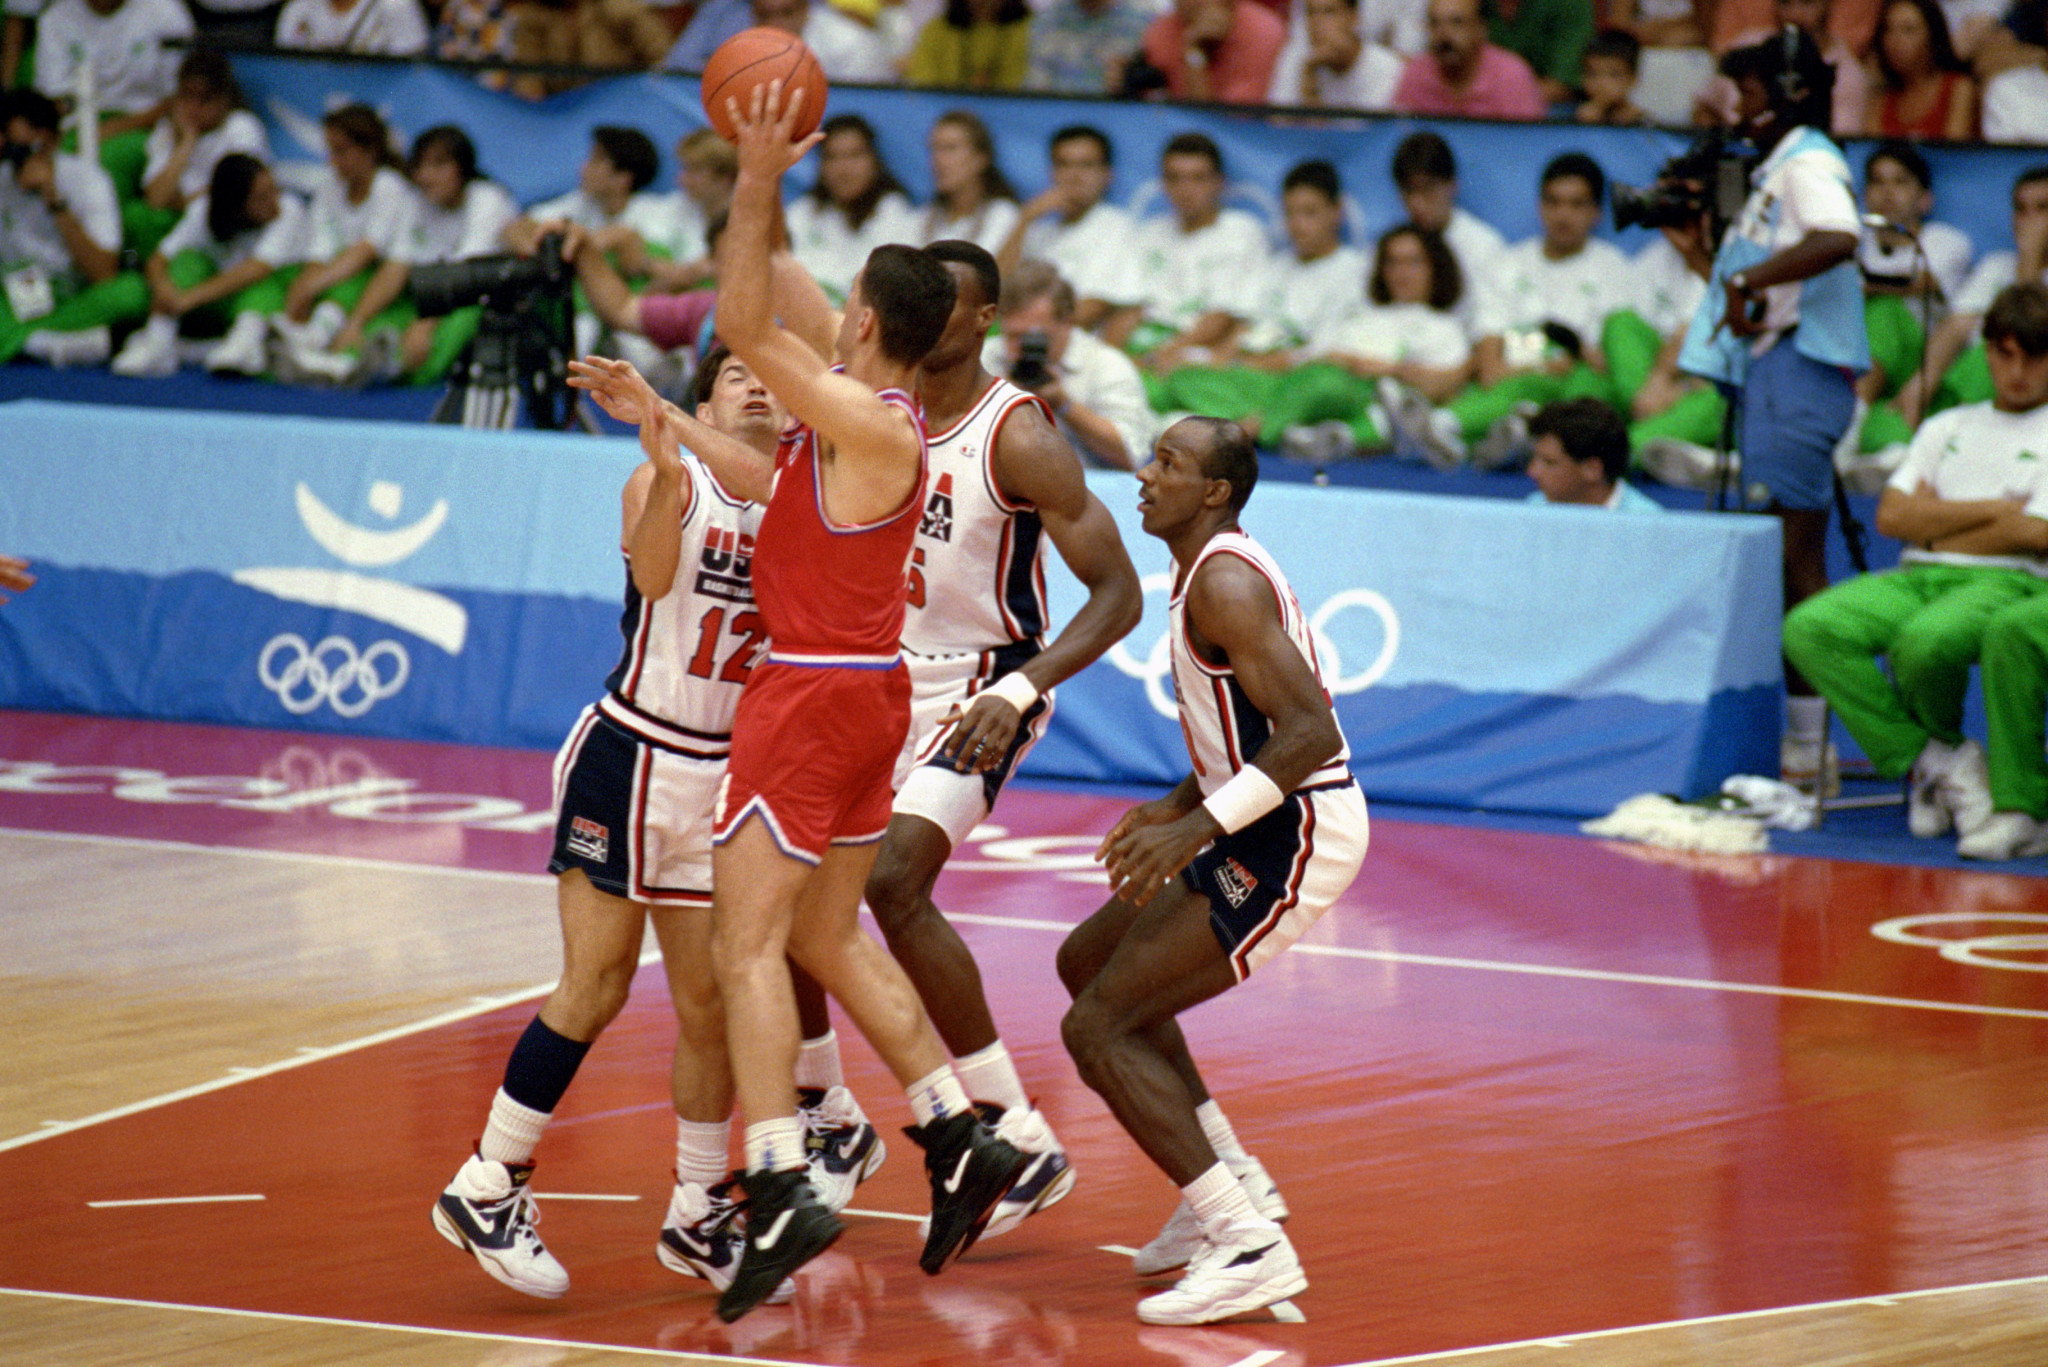 The men's basketball team from Barcelona 1992 were among the award winners ©Getty Images